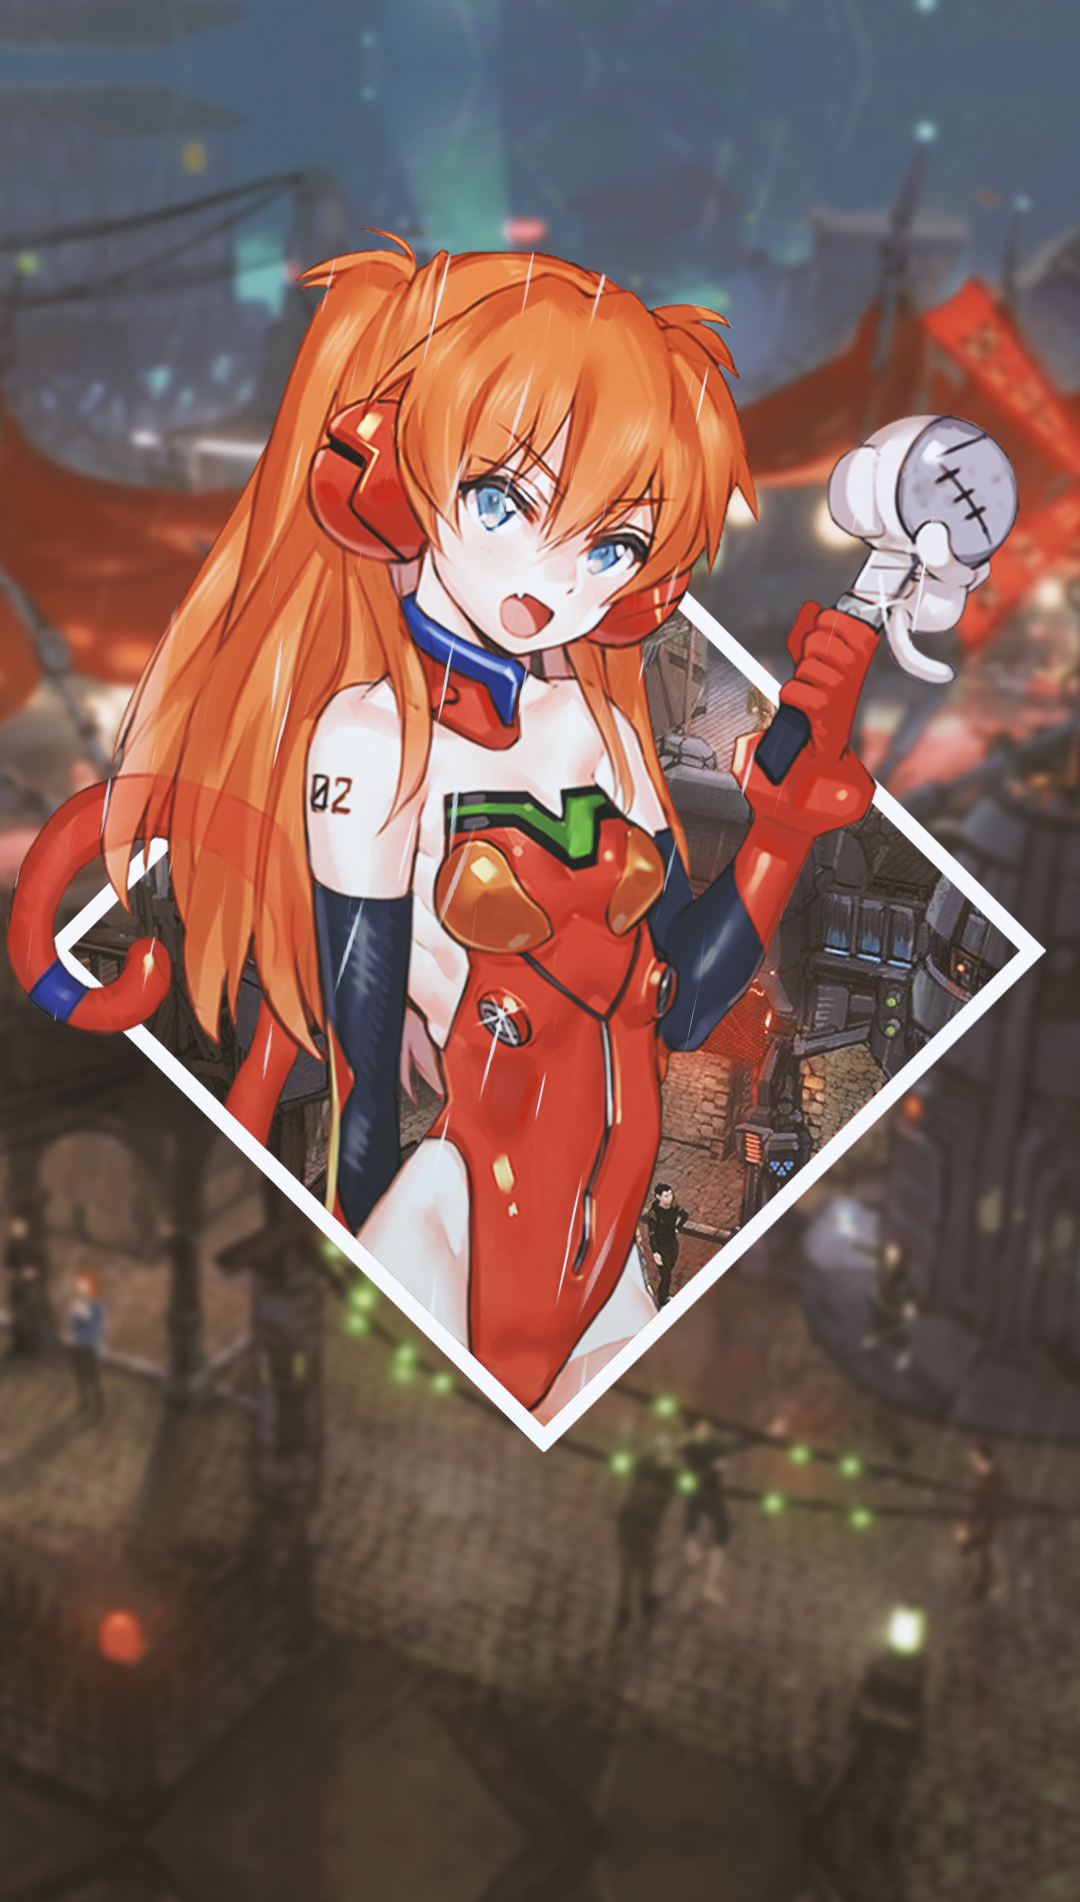 Anime 1080x1902 anime anime girls picture-in-picture Neon Genesis Evangelion